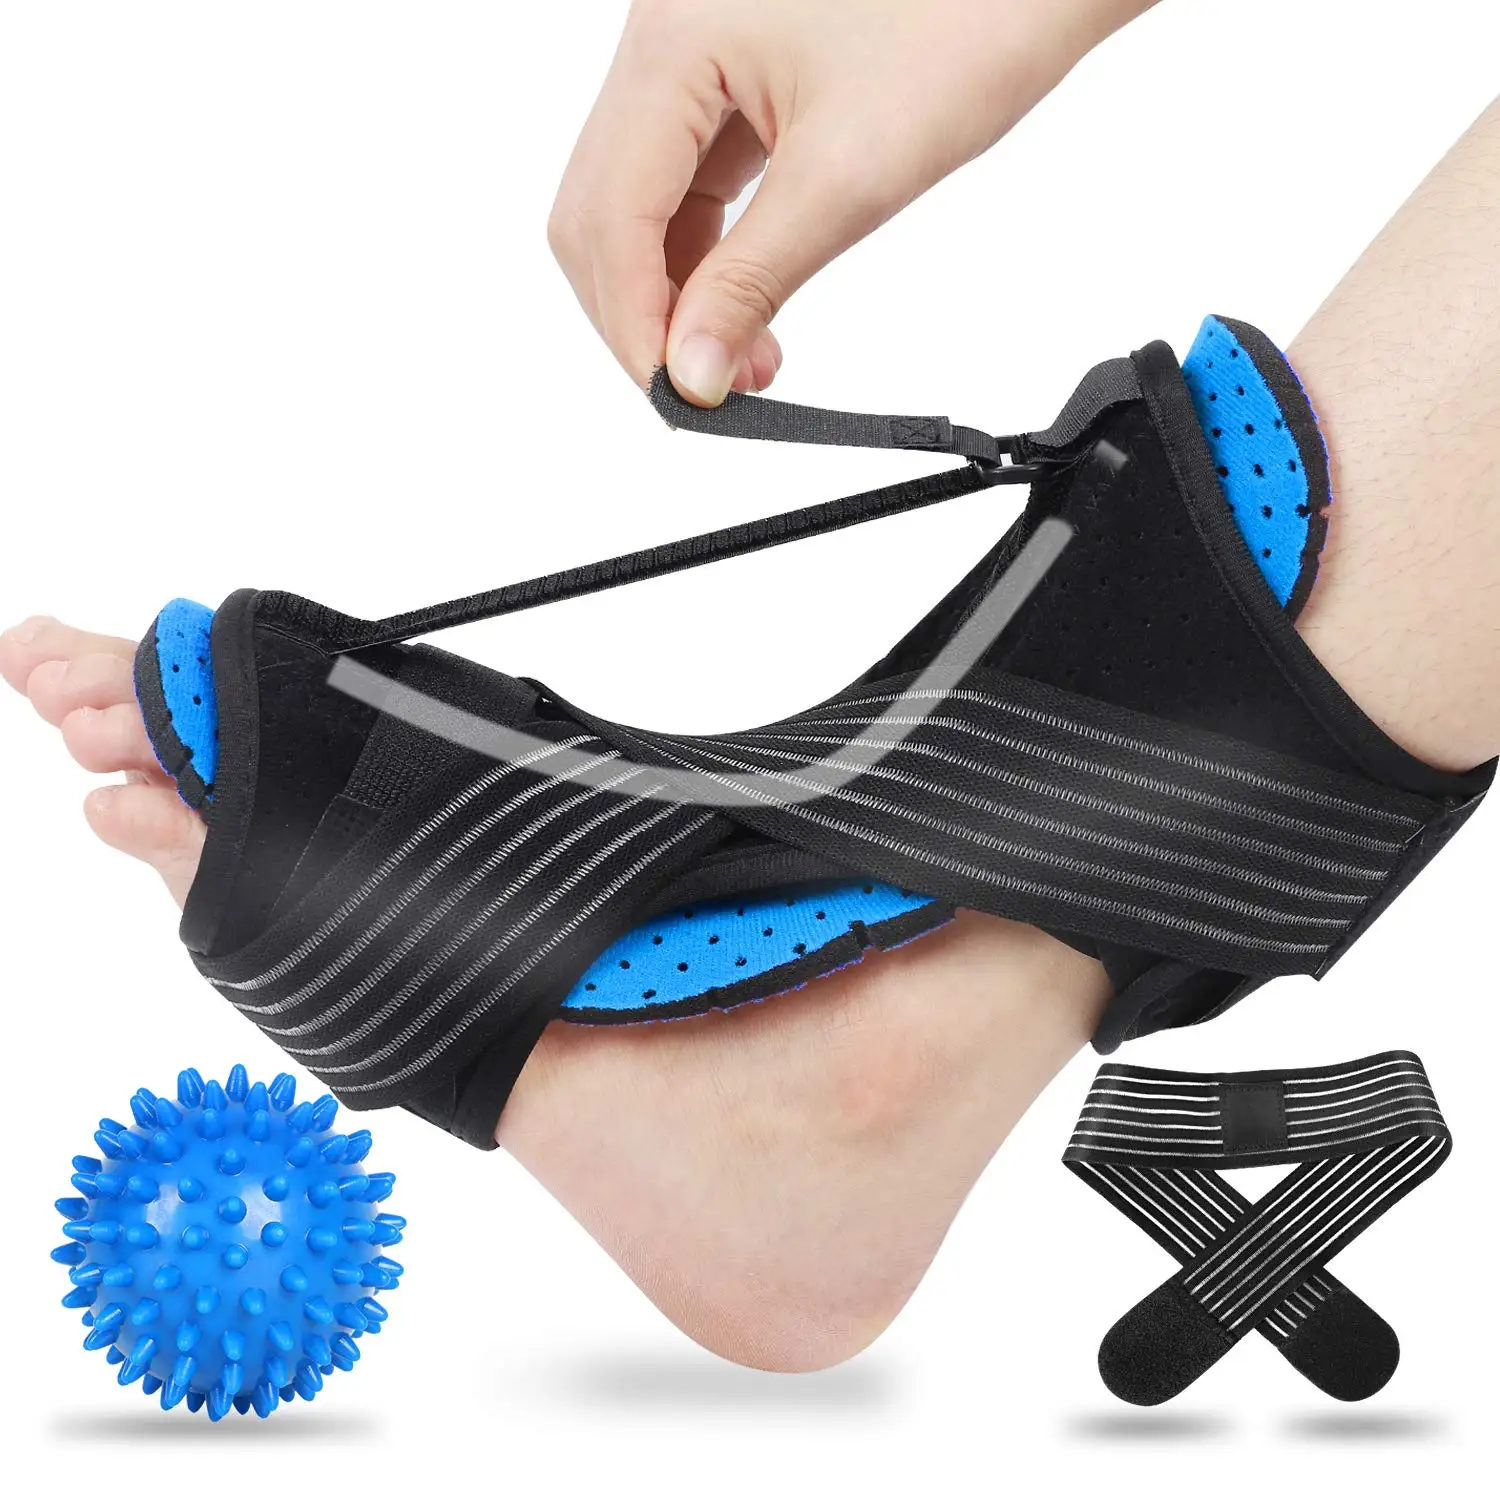 

Adjustable Foot Ankle Brace Dorsal Orthosis Night Splint for plantar fasciitis foot recovery and Physical rehabilitation Adjusta